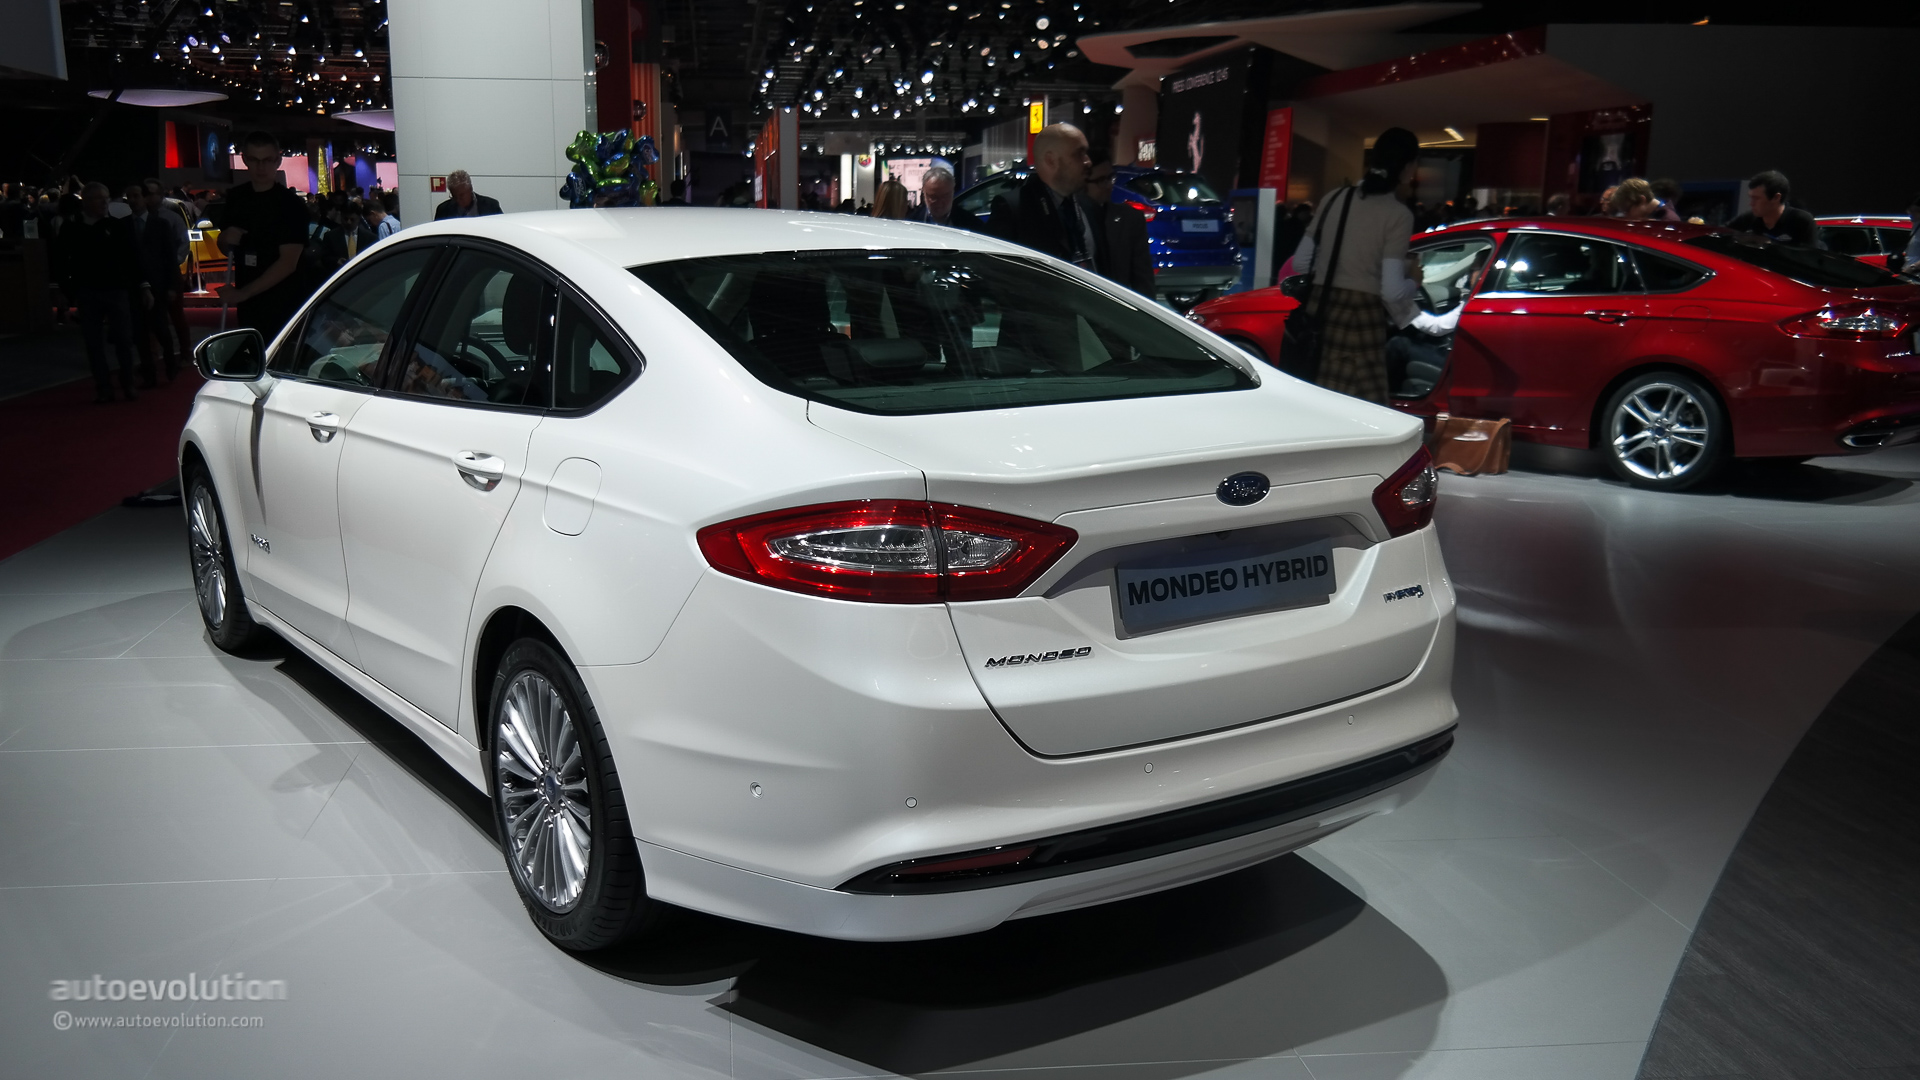 2015 Ford Mondeo Makes World Debut at the Paris Motor Show [Live Photos] - autoevolution